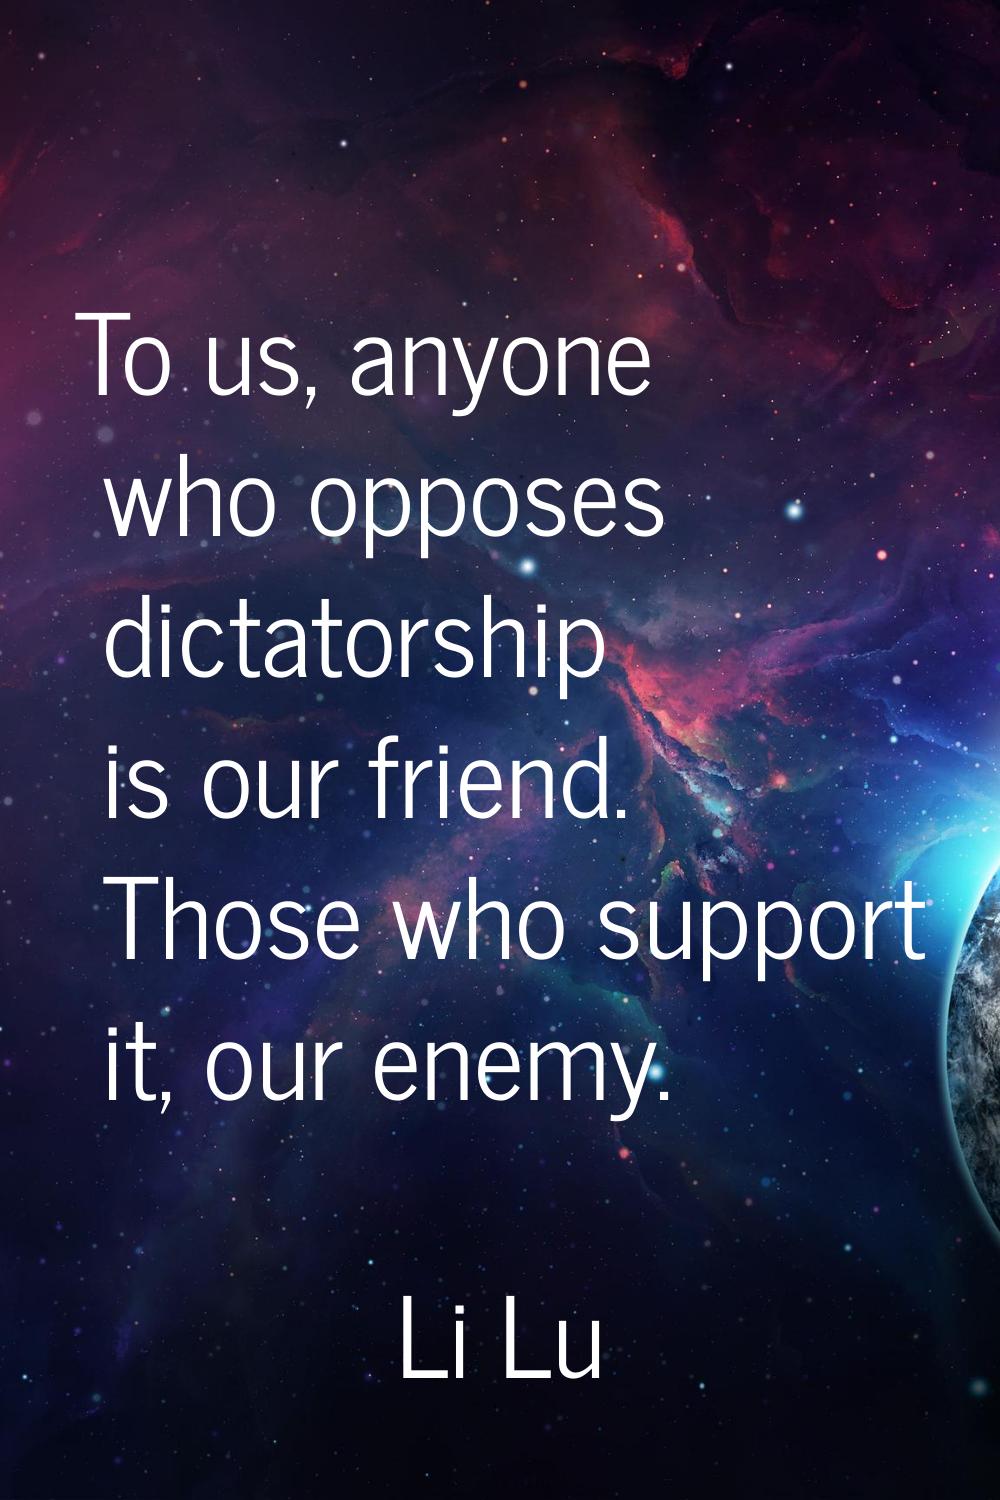 To us, anyone who opposes dictatorship is our friend. Those who support it, our enemy.